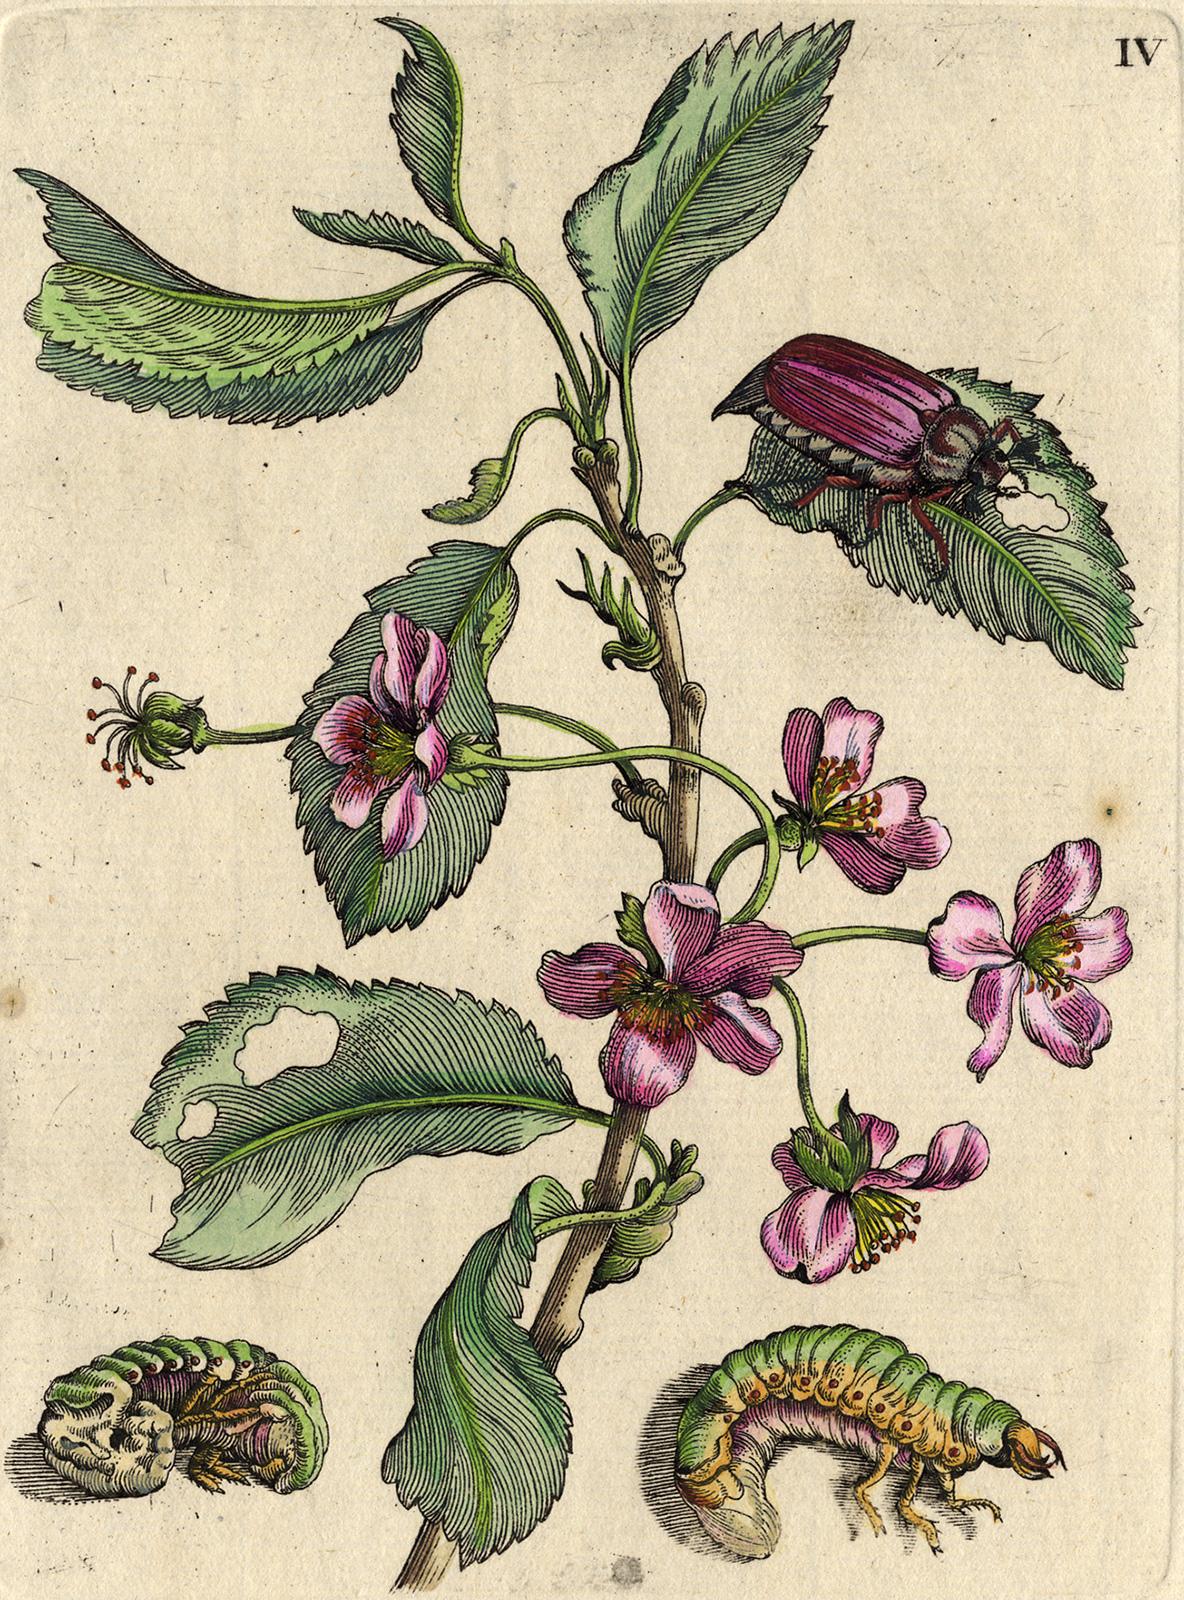 Cherry and Prunus with insects by Merian - Handcoloured engraving - 18th century - Print by Maria Sybilla Merian